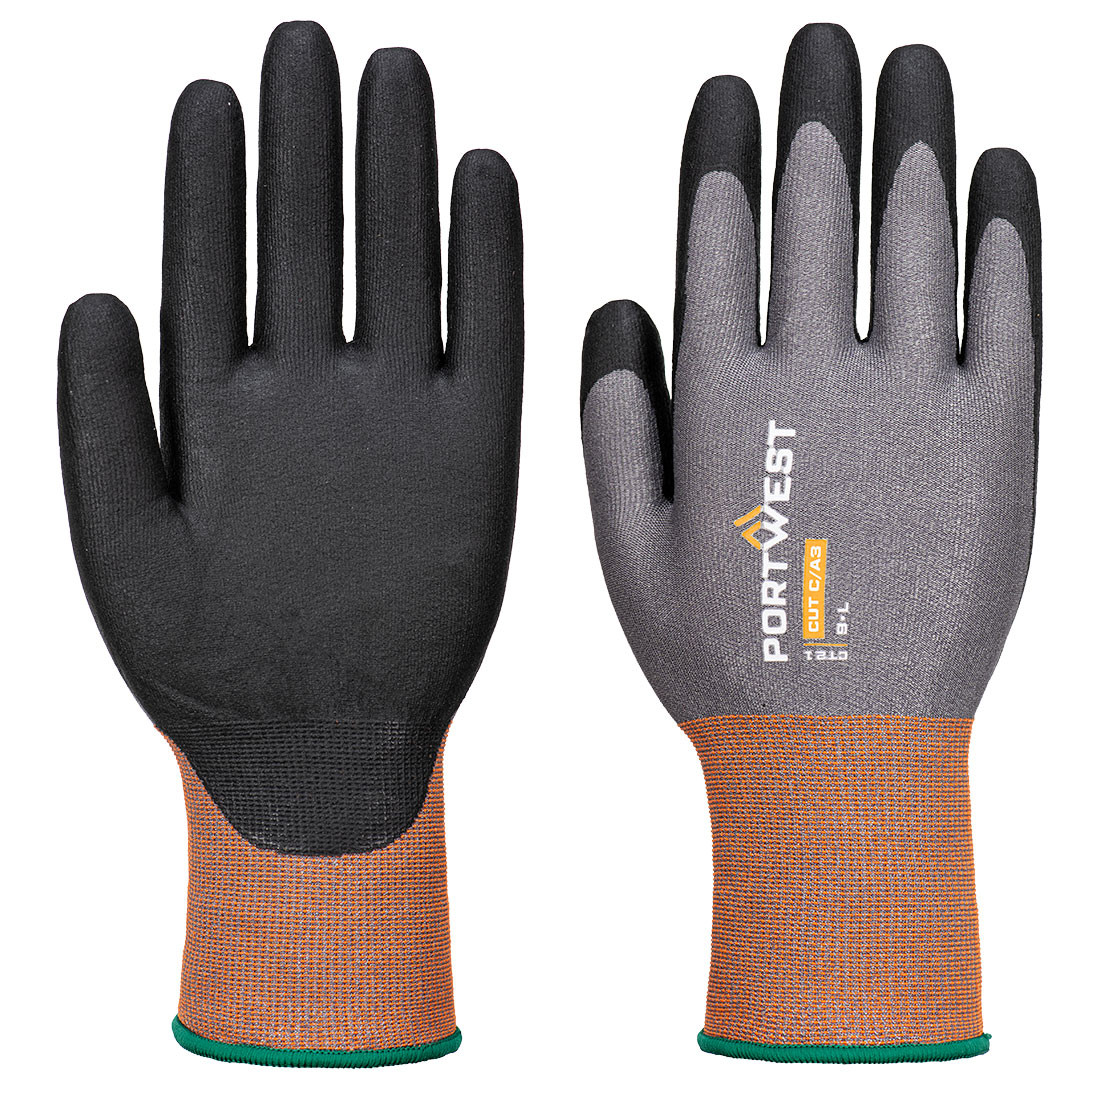 CT Cut C21 Nitrile Glove - Personal protection